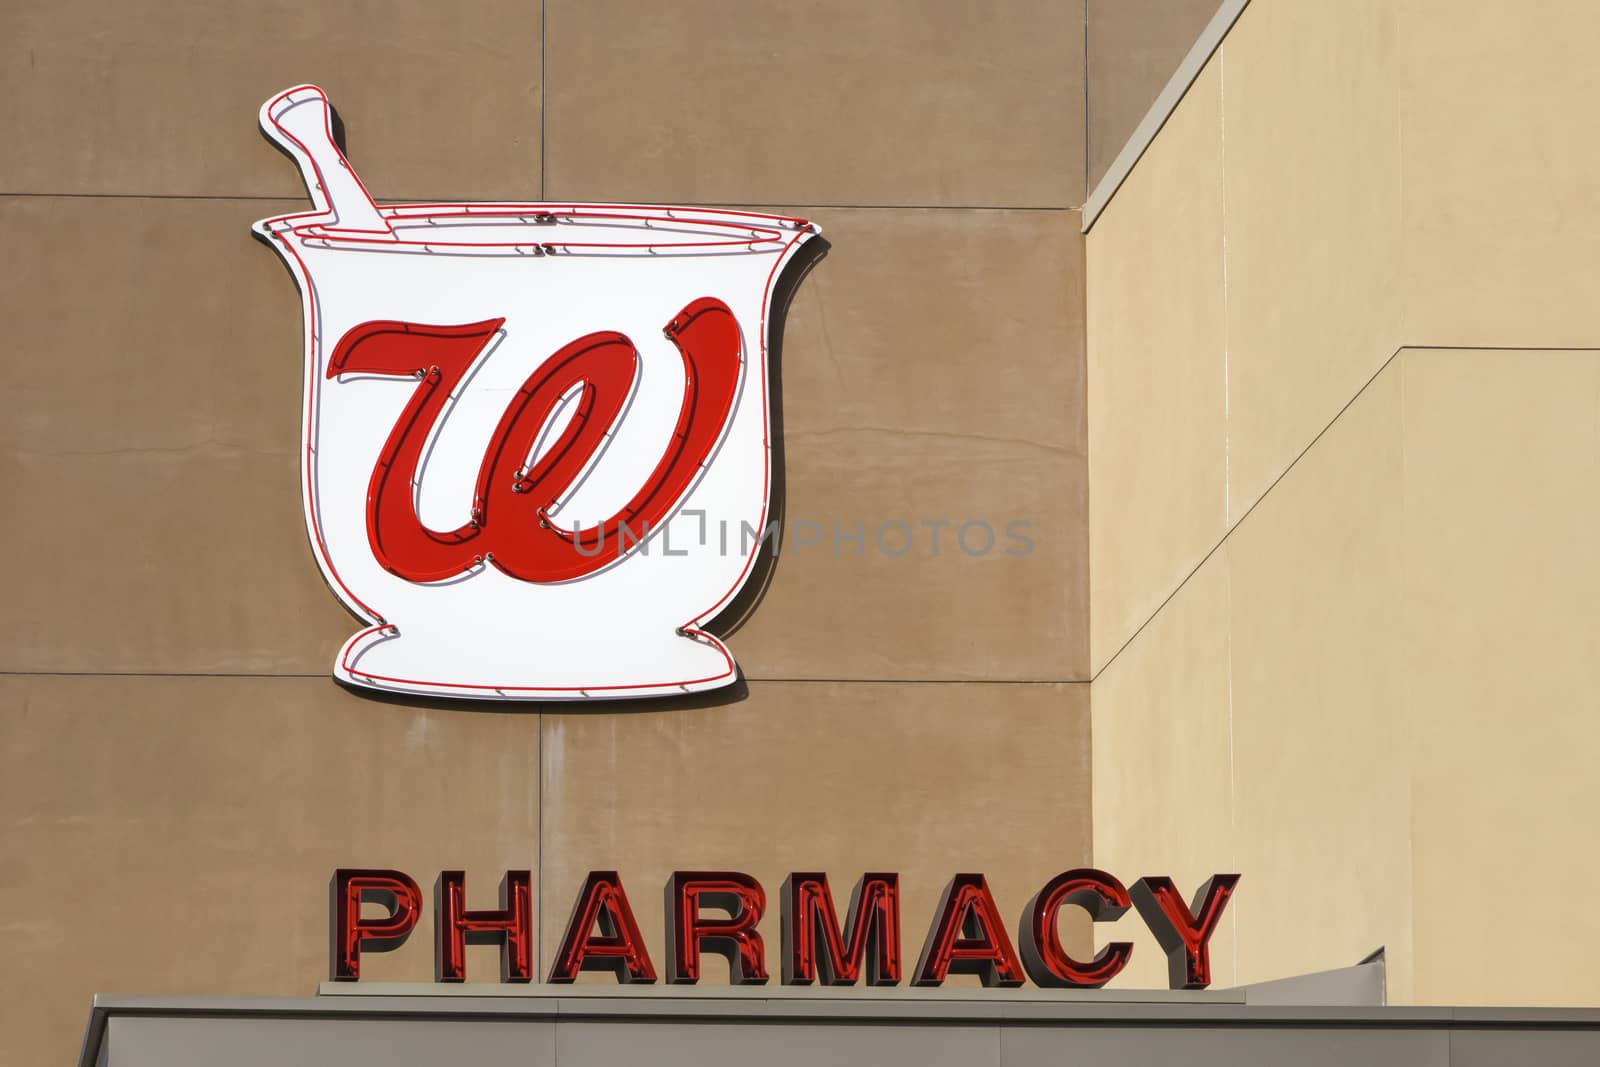 LOS ANGELES, CA/USA - December 6, 2015: Walgreens store exterior and logo. Walgreens is the largest drug retailing chain in the United States.